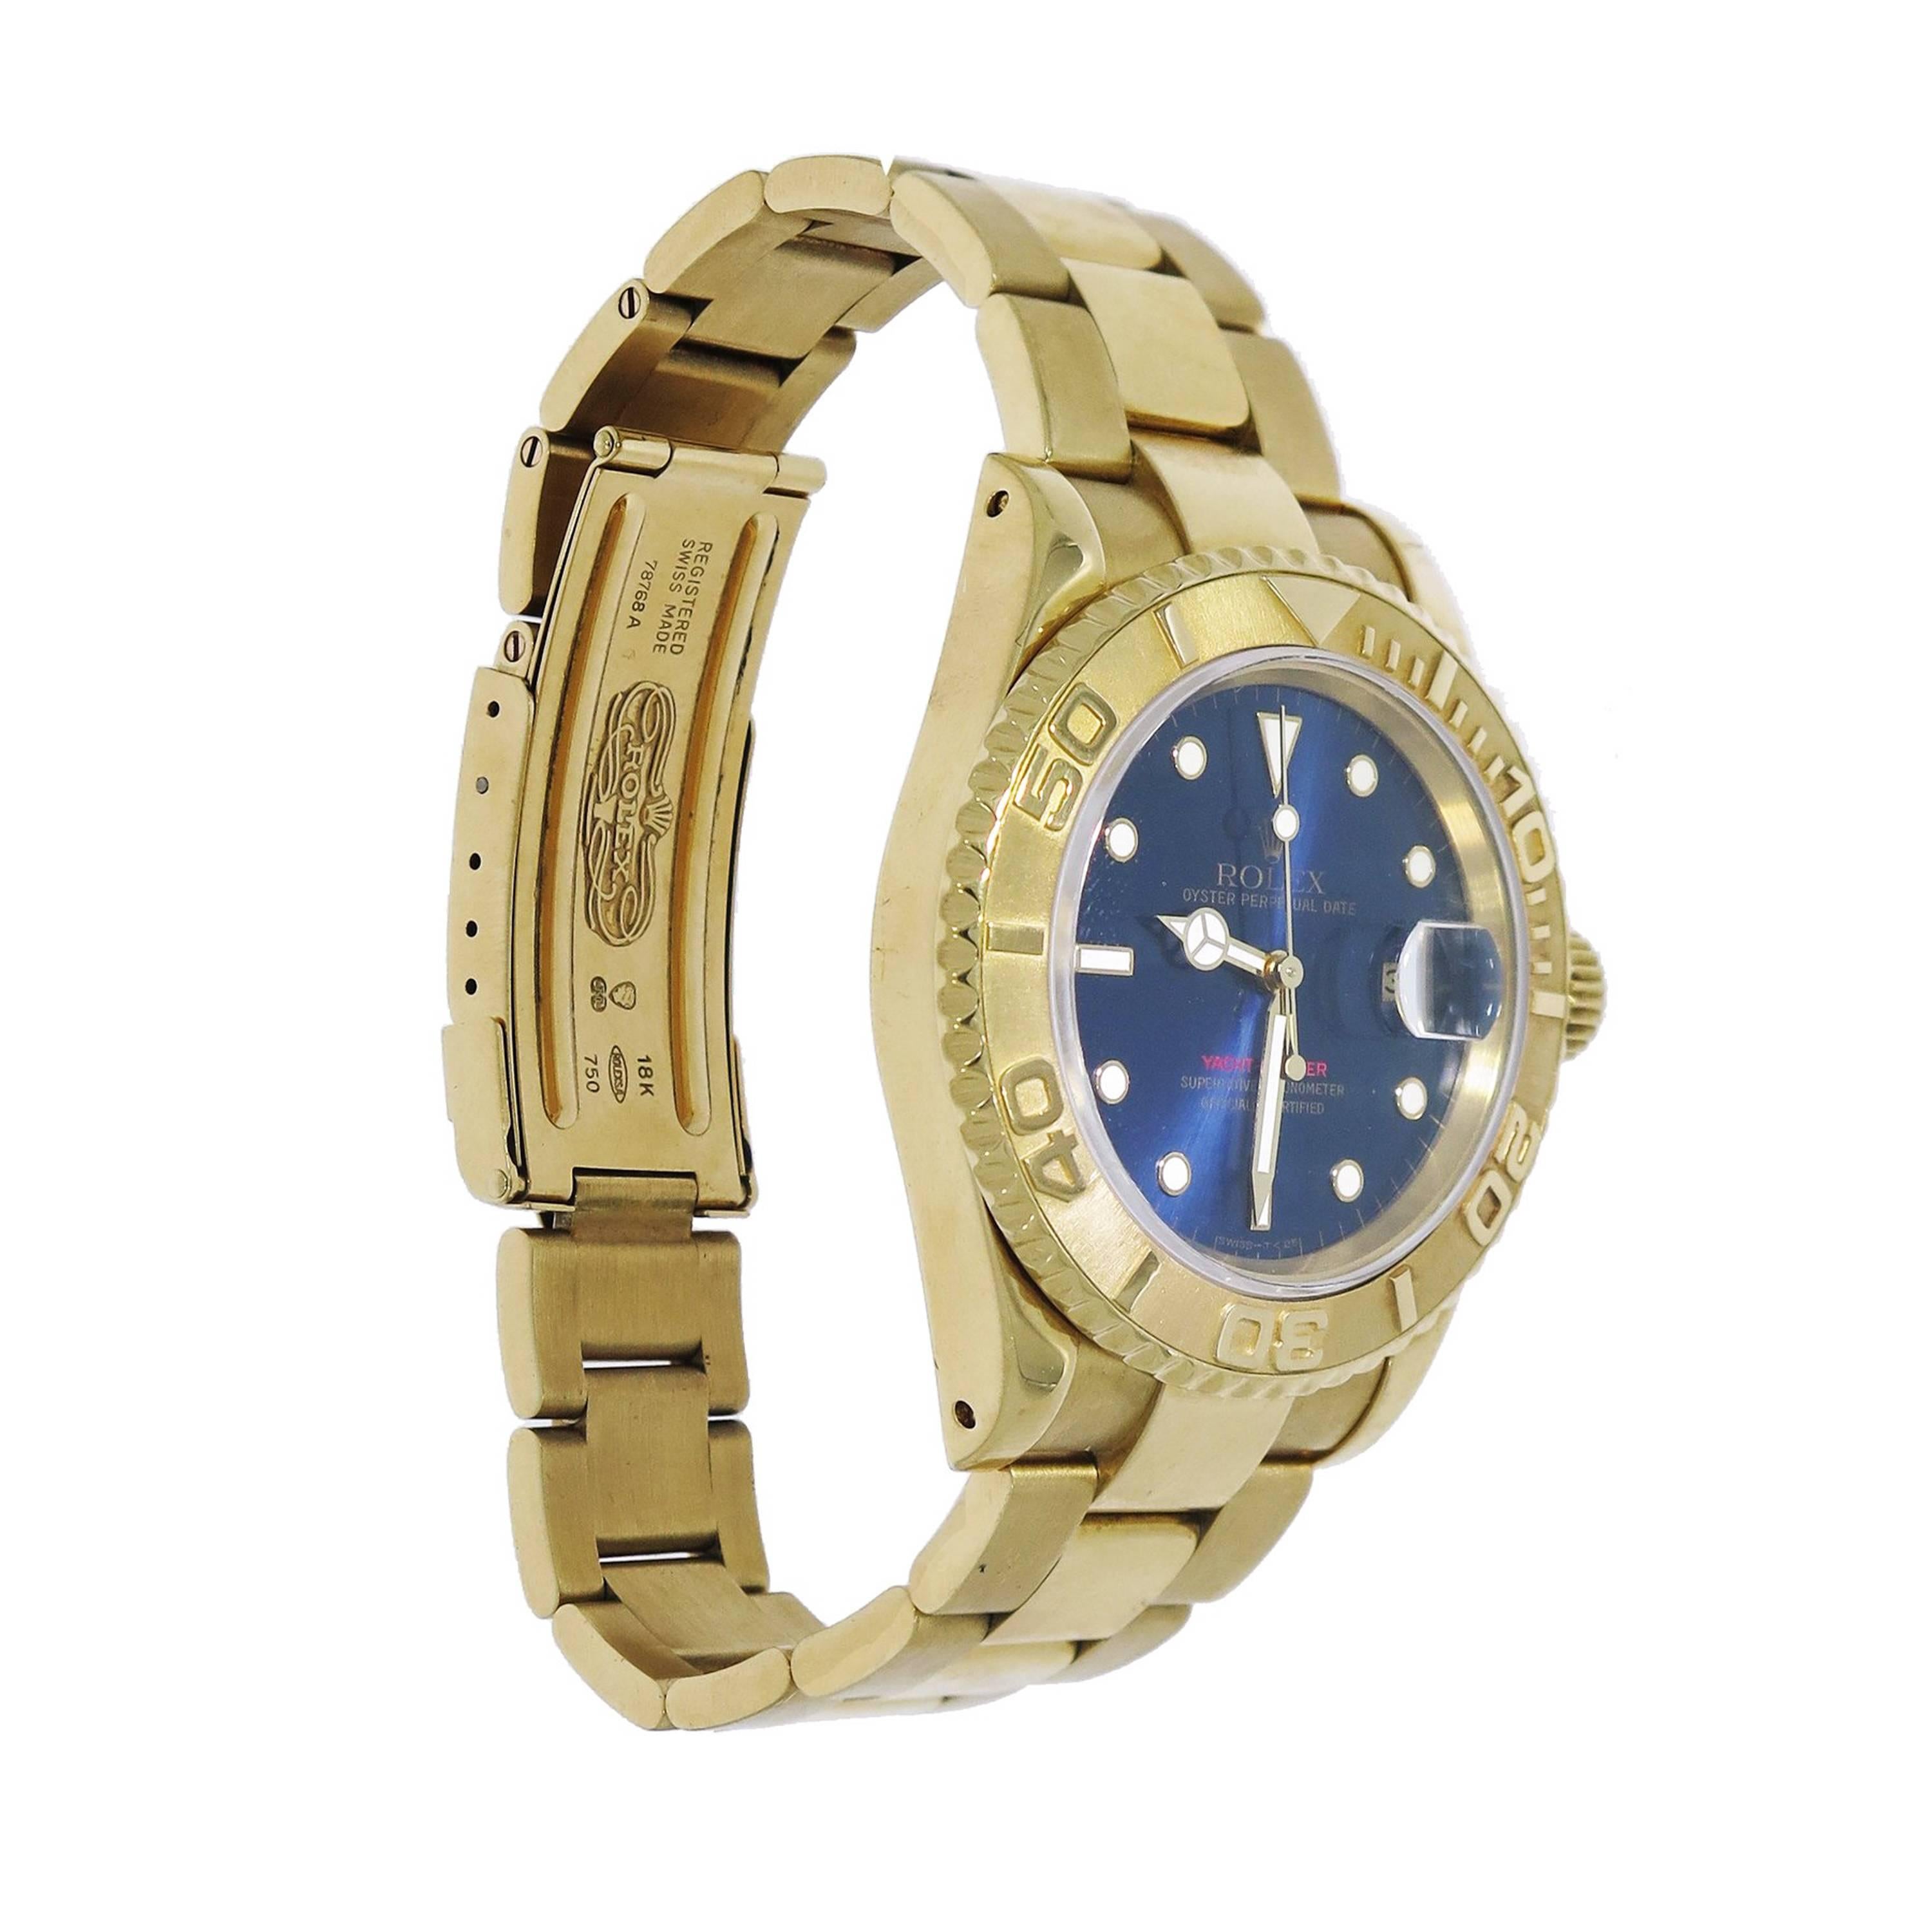 Rolex Yachtmaster embodies the spirit of the sailor, created with the regatta chronograph for the yachting competition.
This timepiece is crafted in 18k yellow gold and features a self-winding movement with indications for the Hours, Minutes,